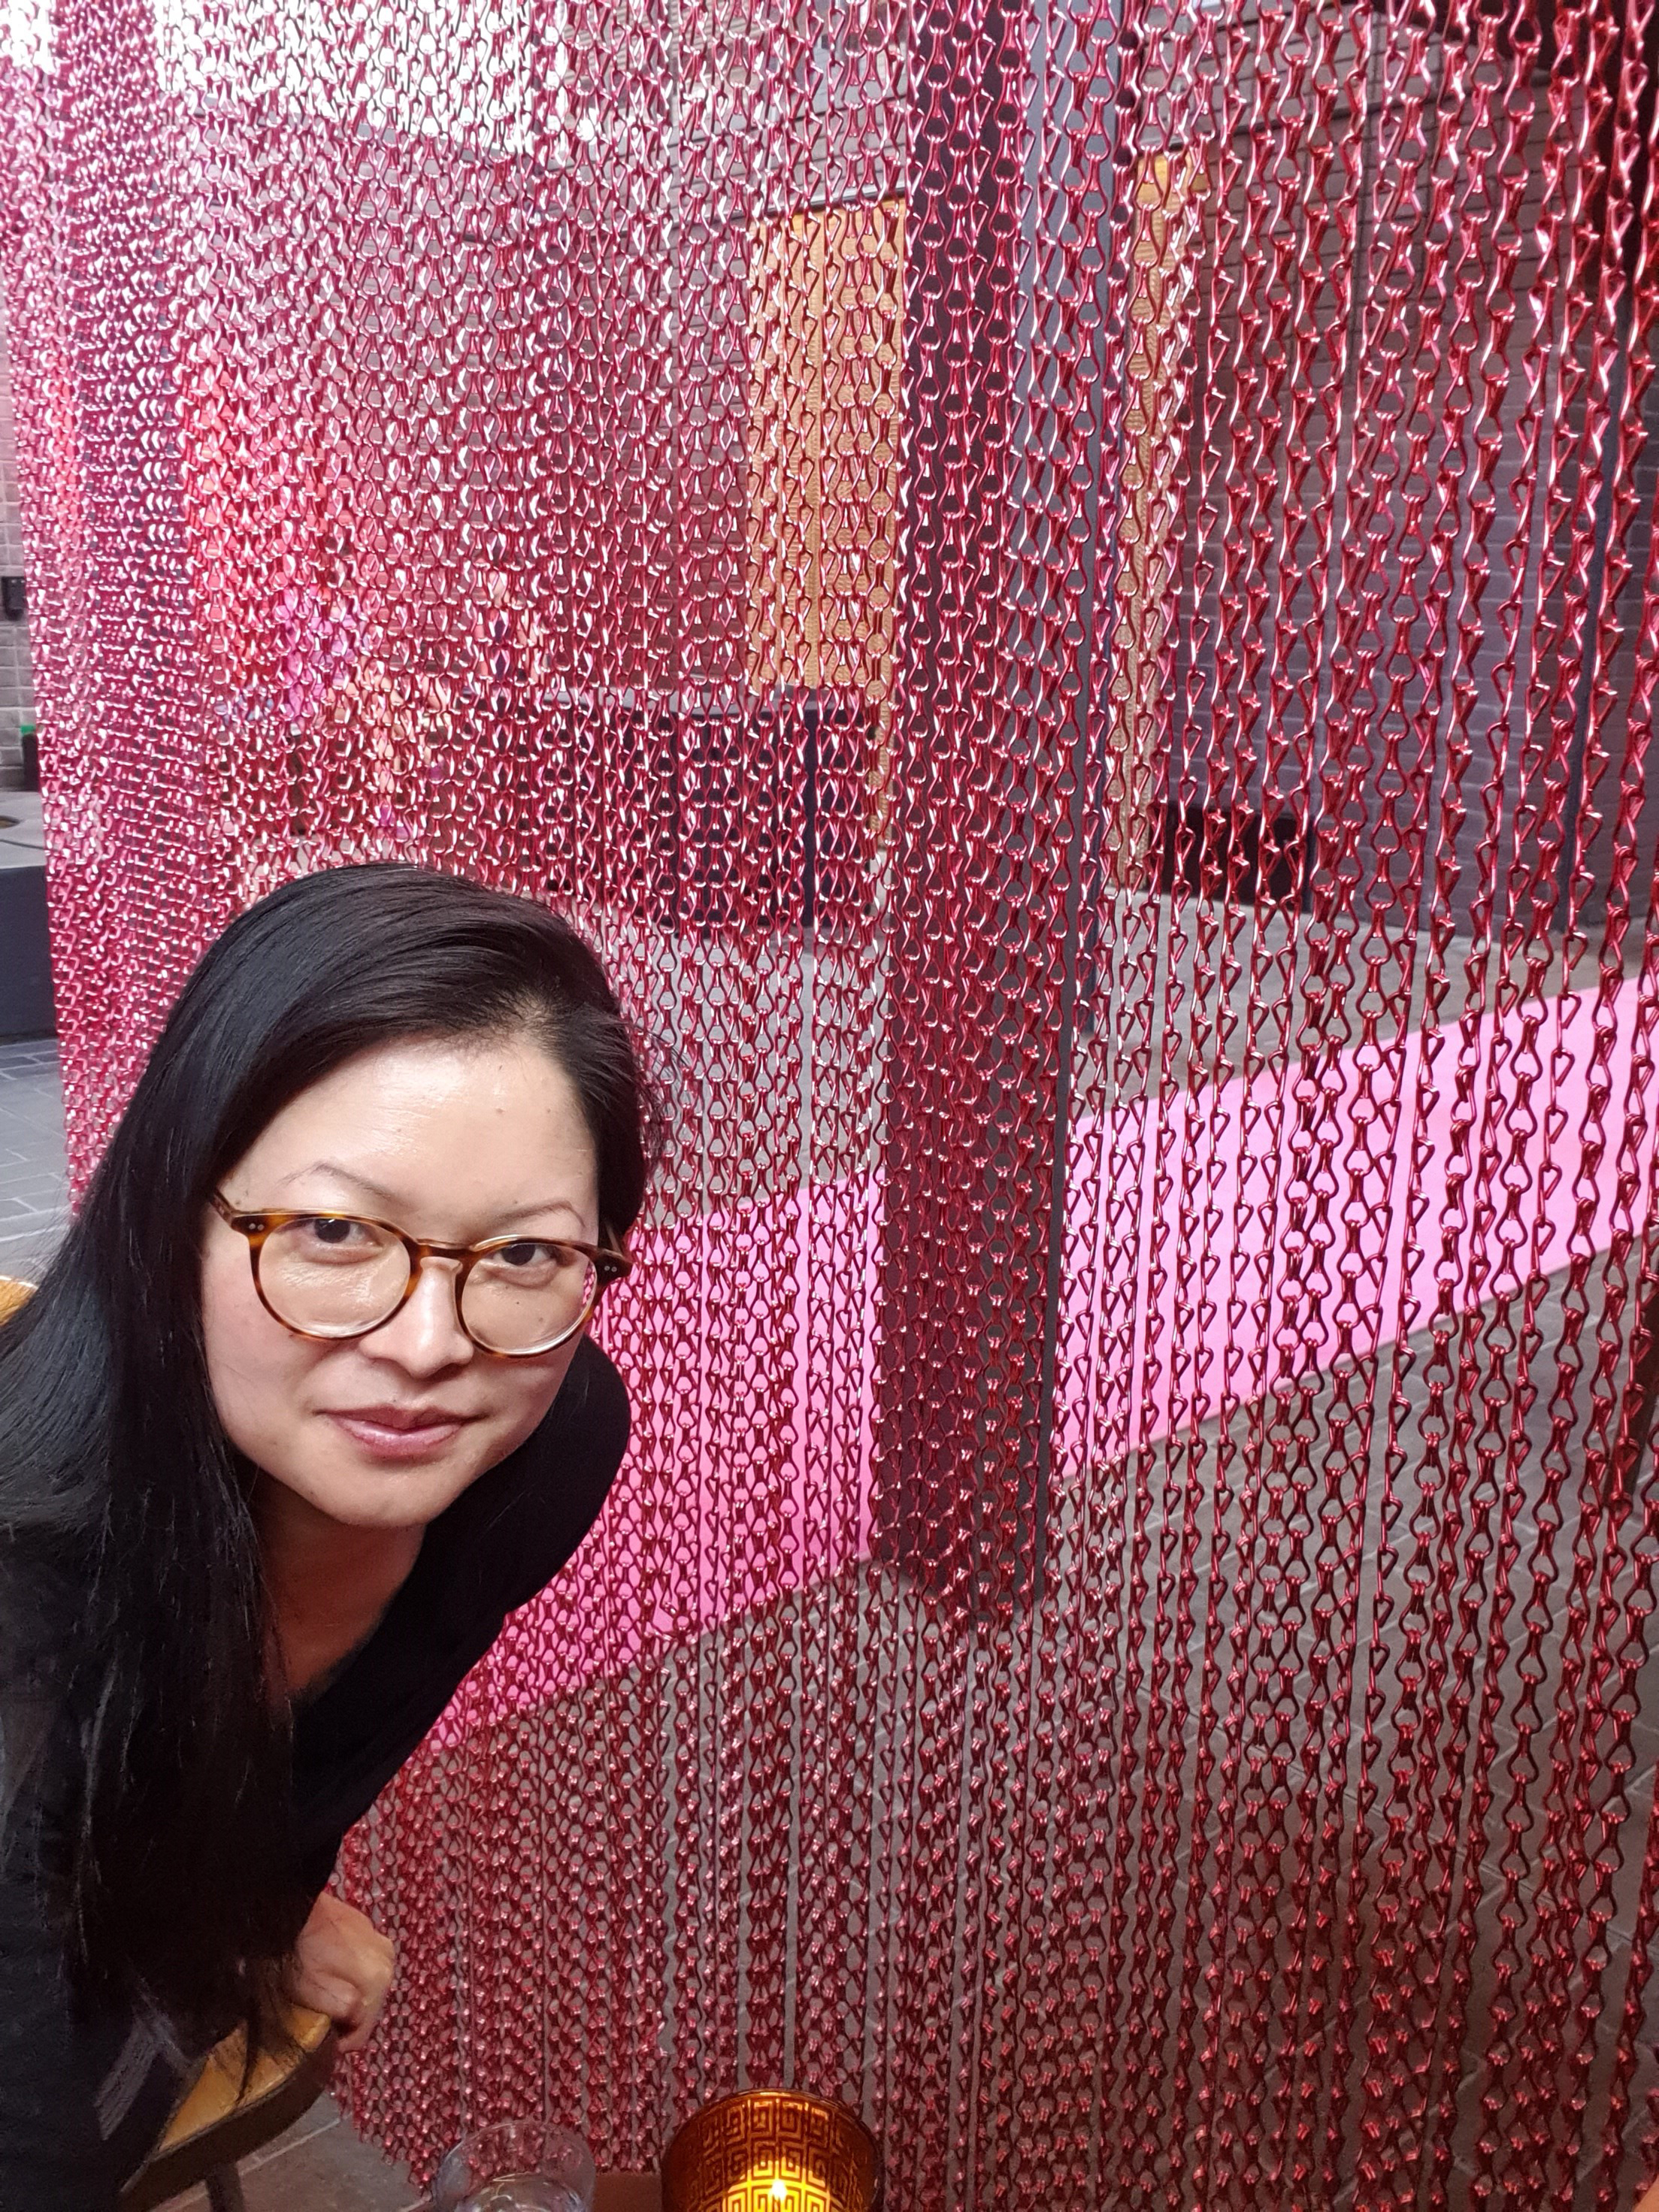 Photograph of a person with long black hair and glasses leaning into the picture in front of a pink art installation